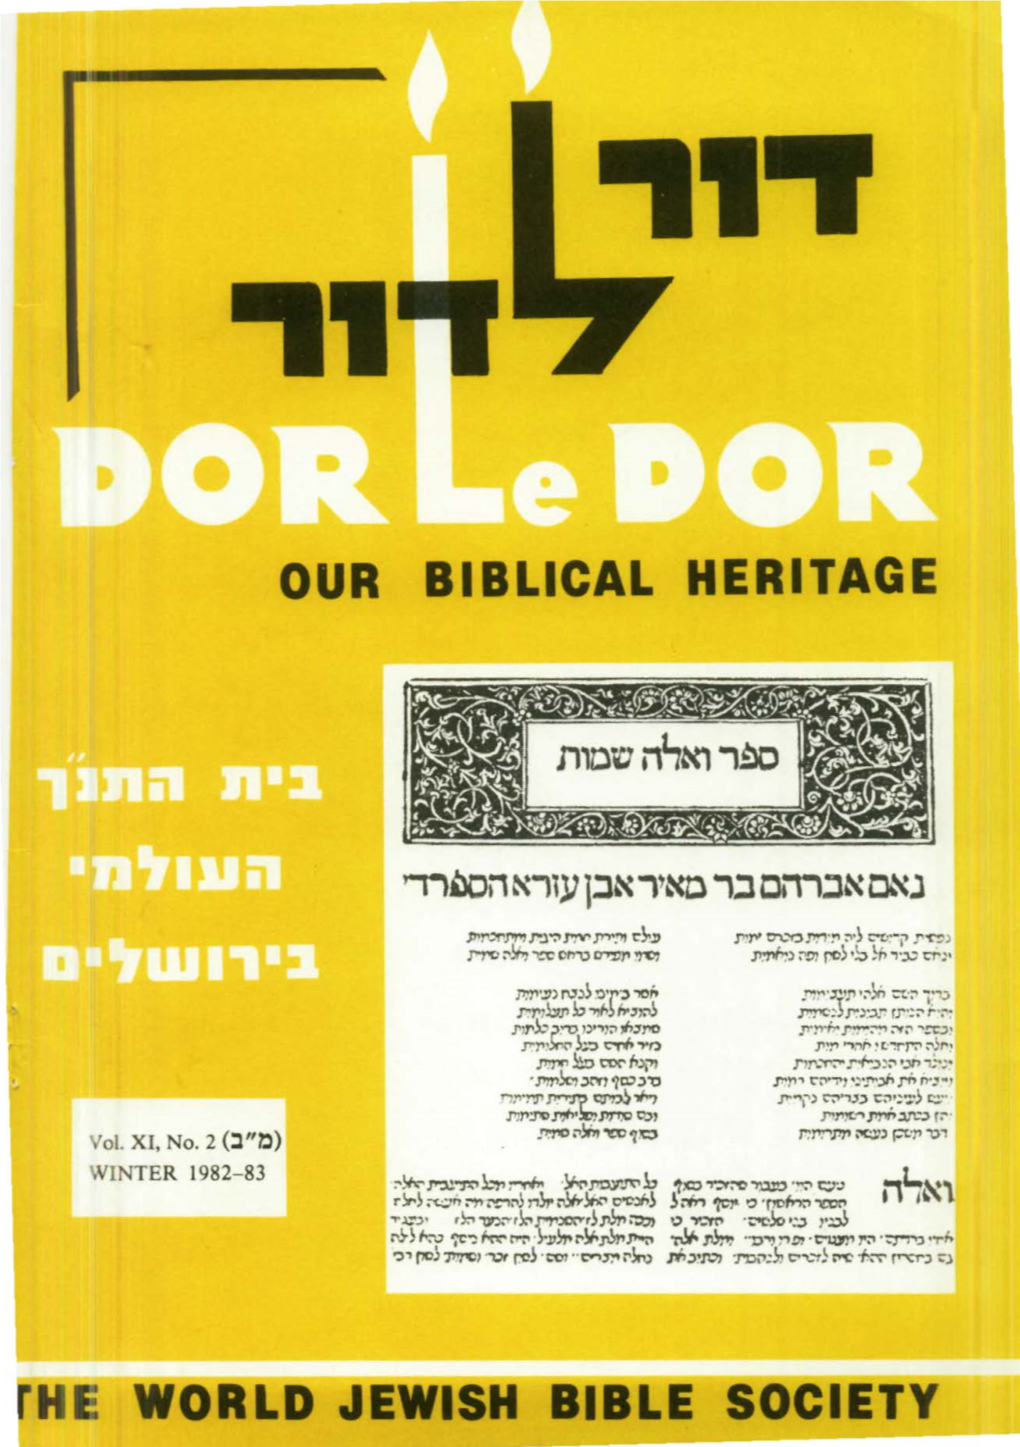 Our Biblical Heritage He World Jewish Bible Society